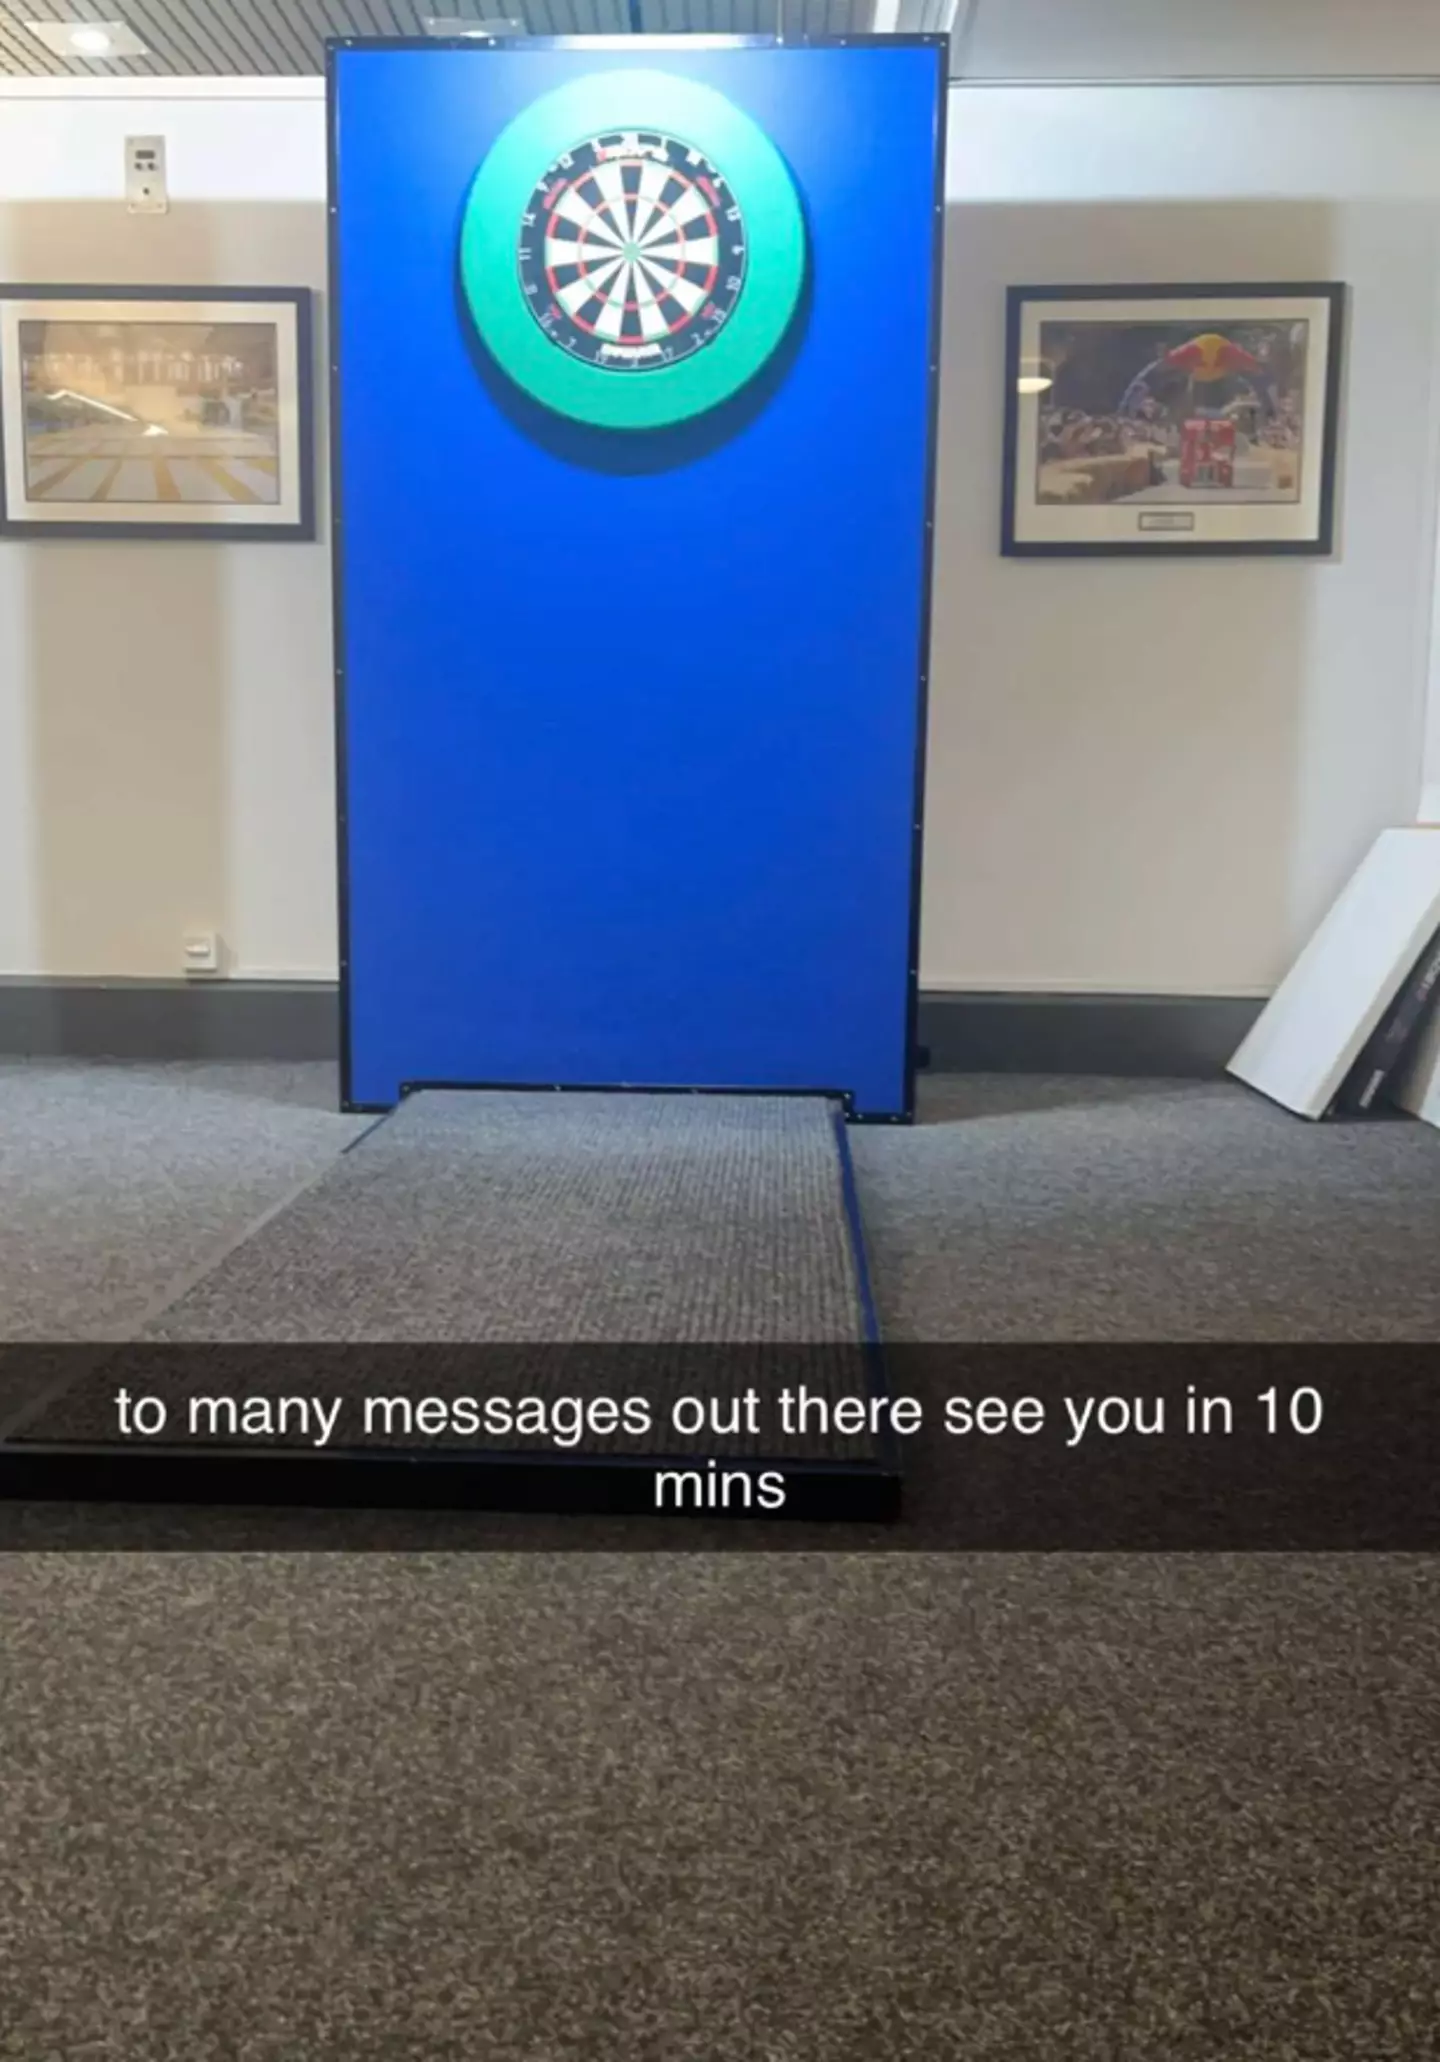 It's said to be from his snapchat story.